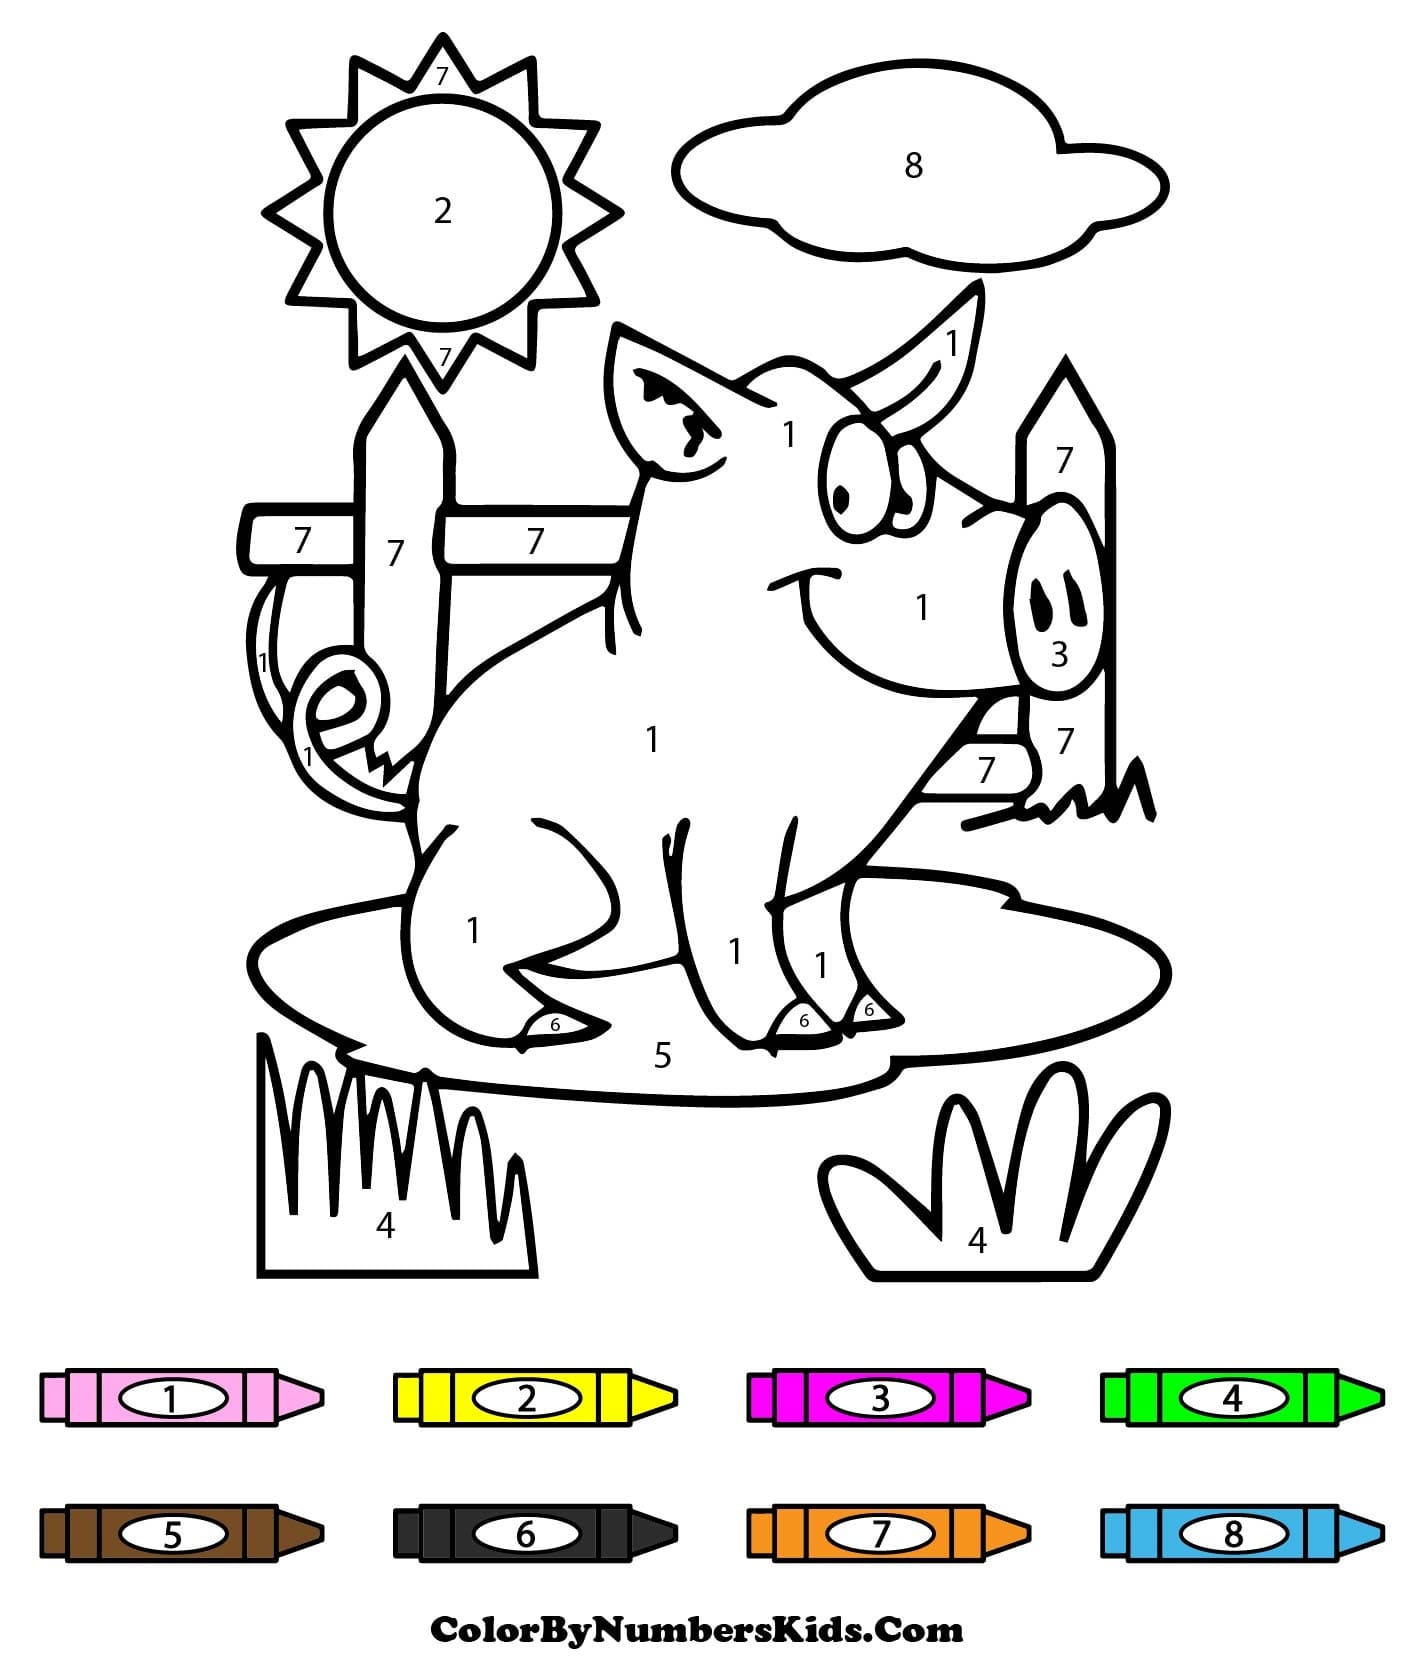 Pig Color By Number